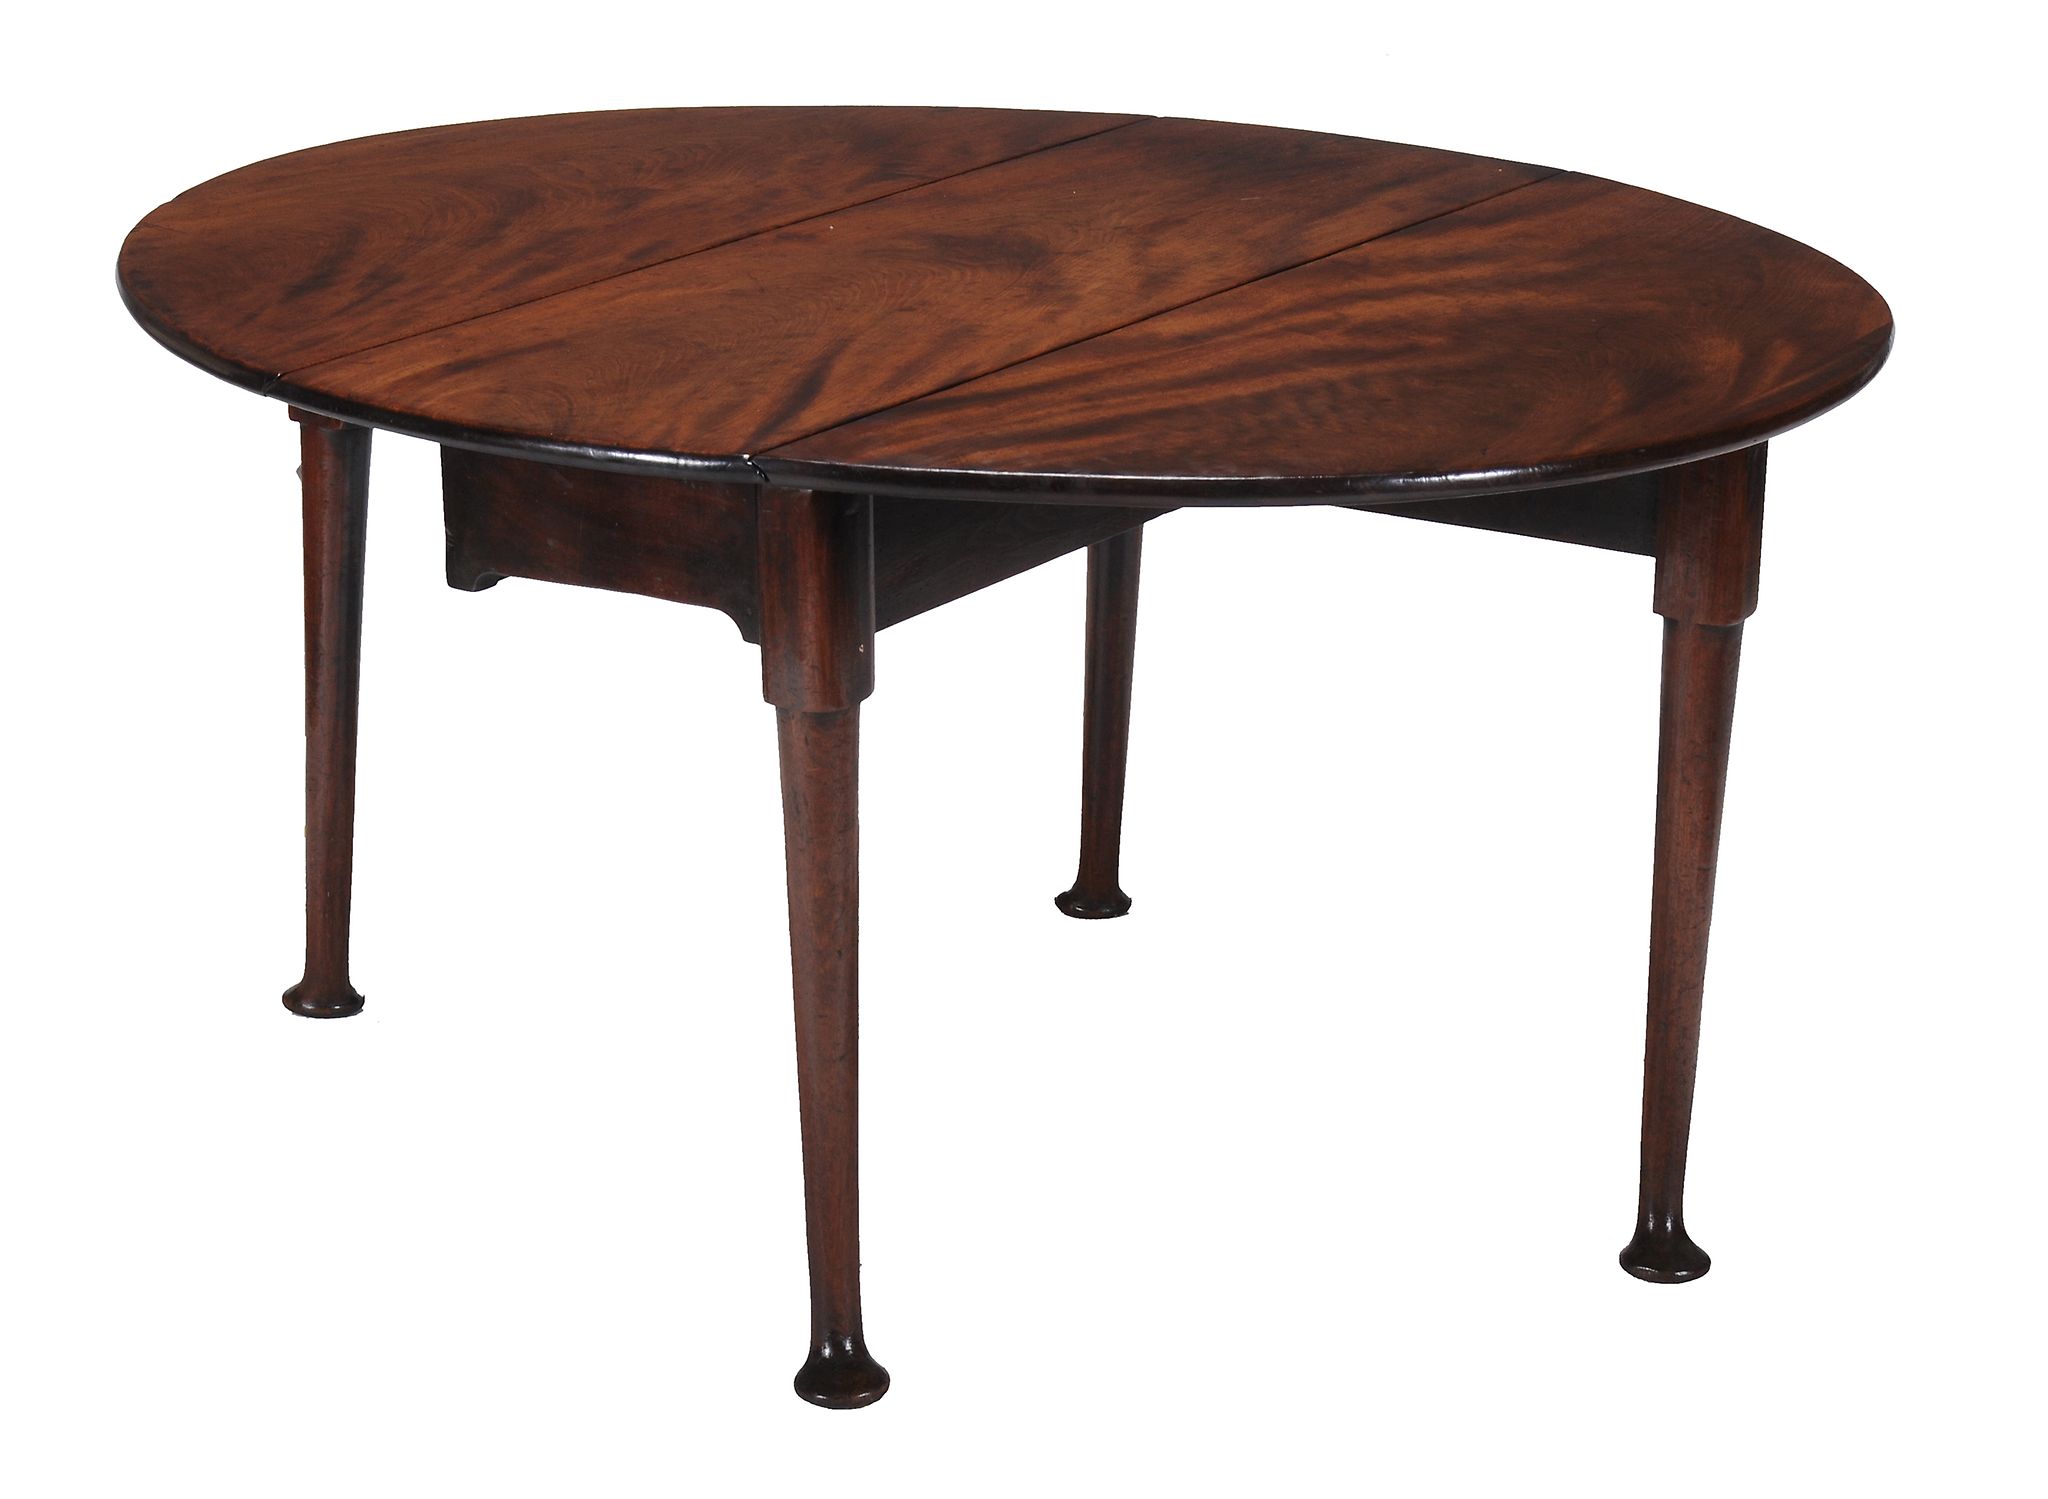 A George II mahogany drop leaf dining table,   circa 1750, the oval top with moulded edge